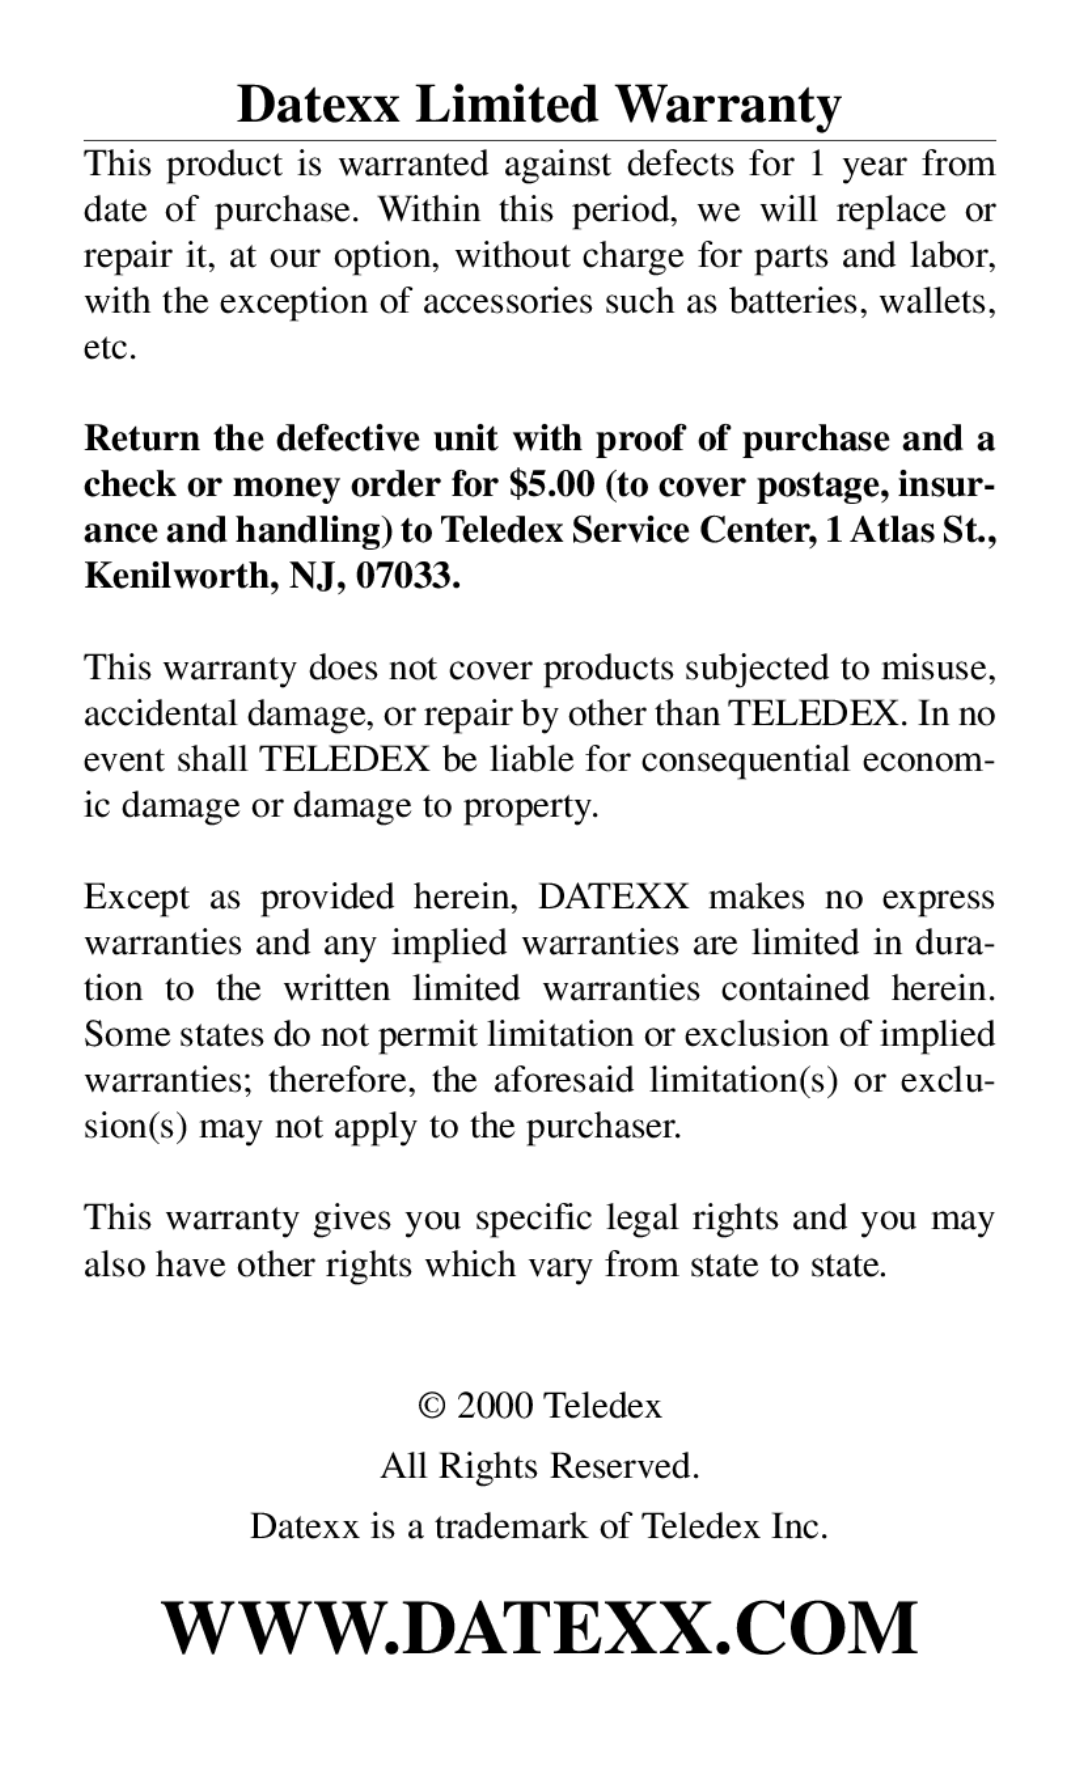 Datexx DS-700 owner manual Datexx Limited Warranty 